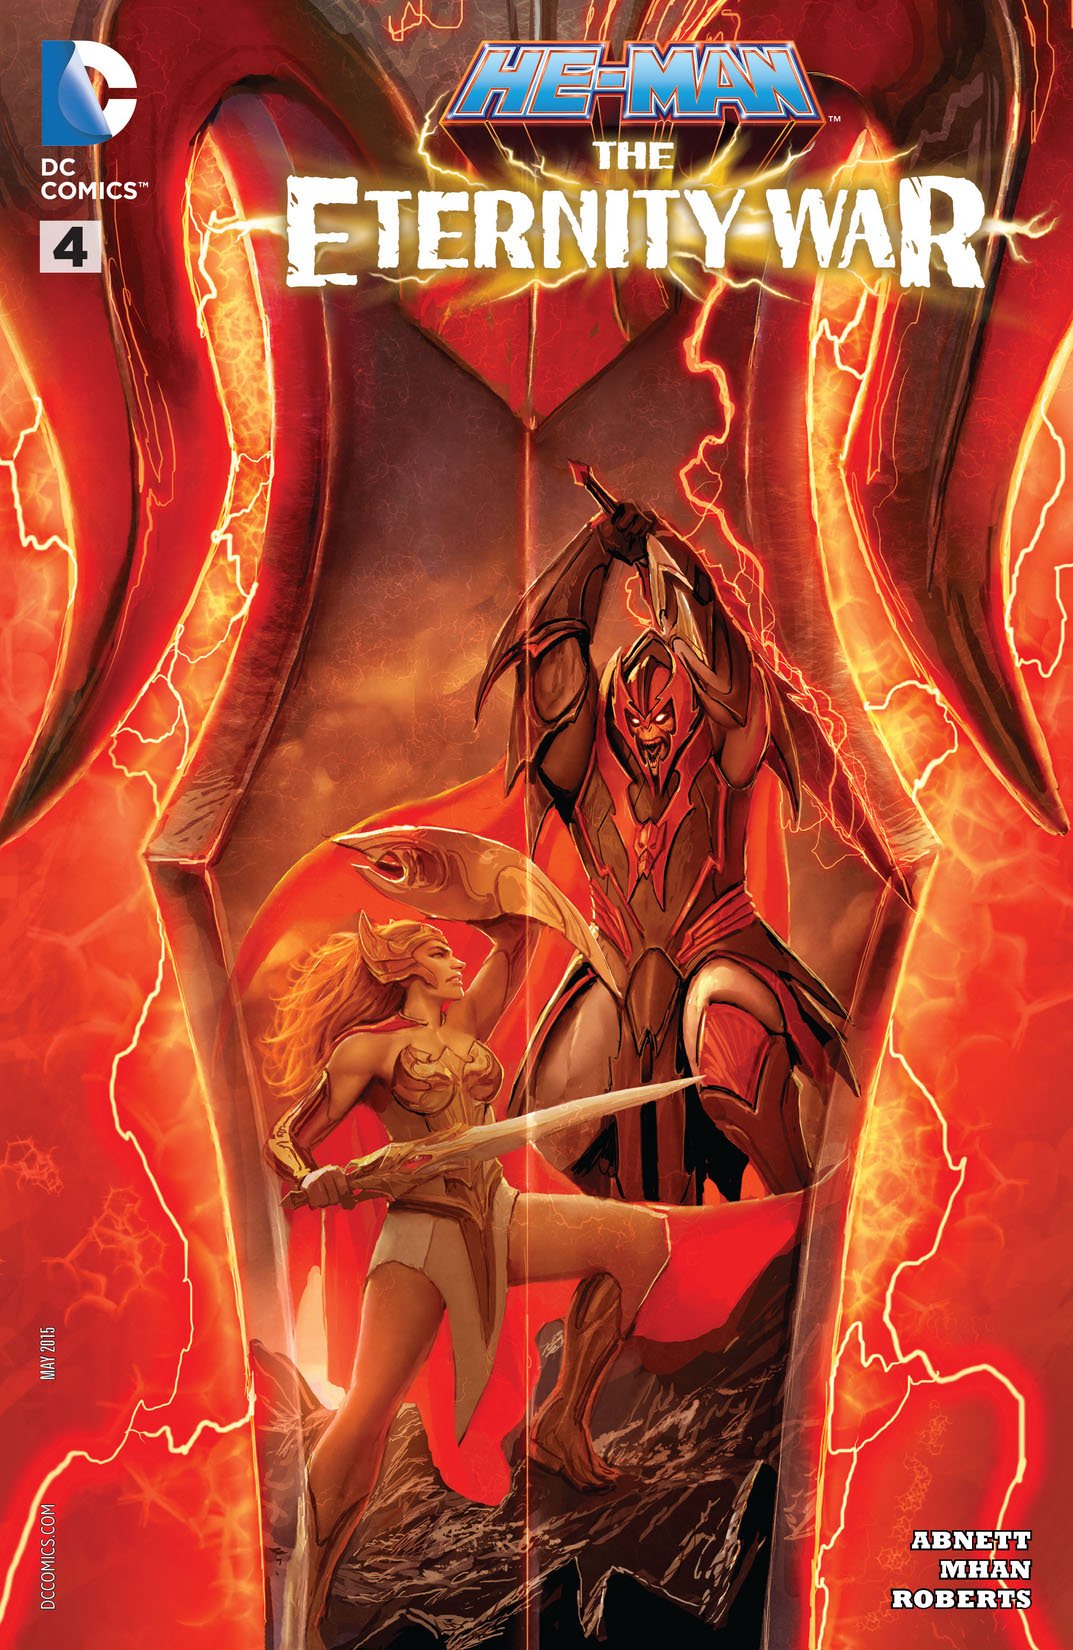 He-Man: The Eternity War #4 preview images